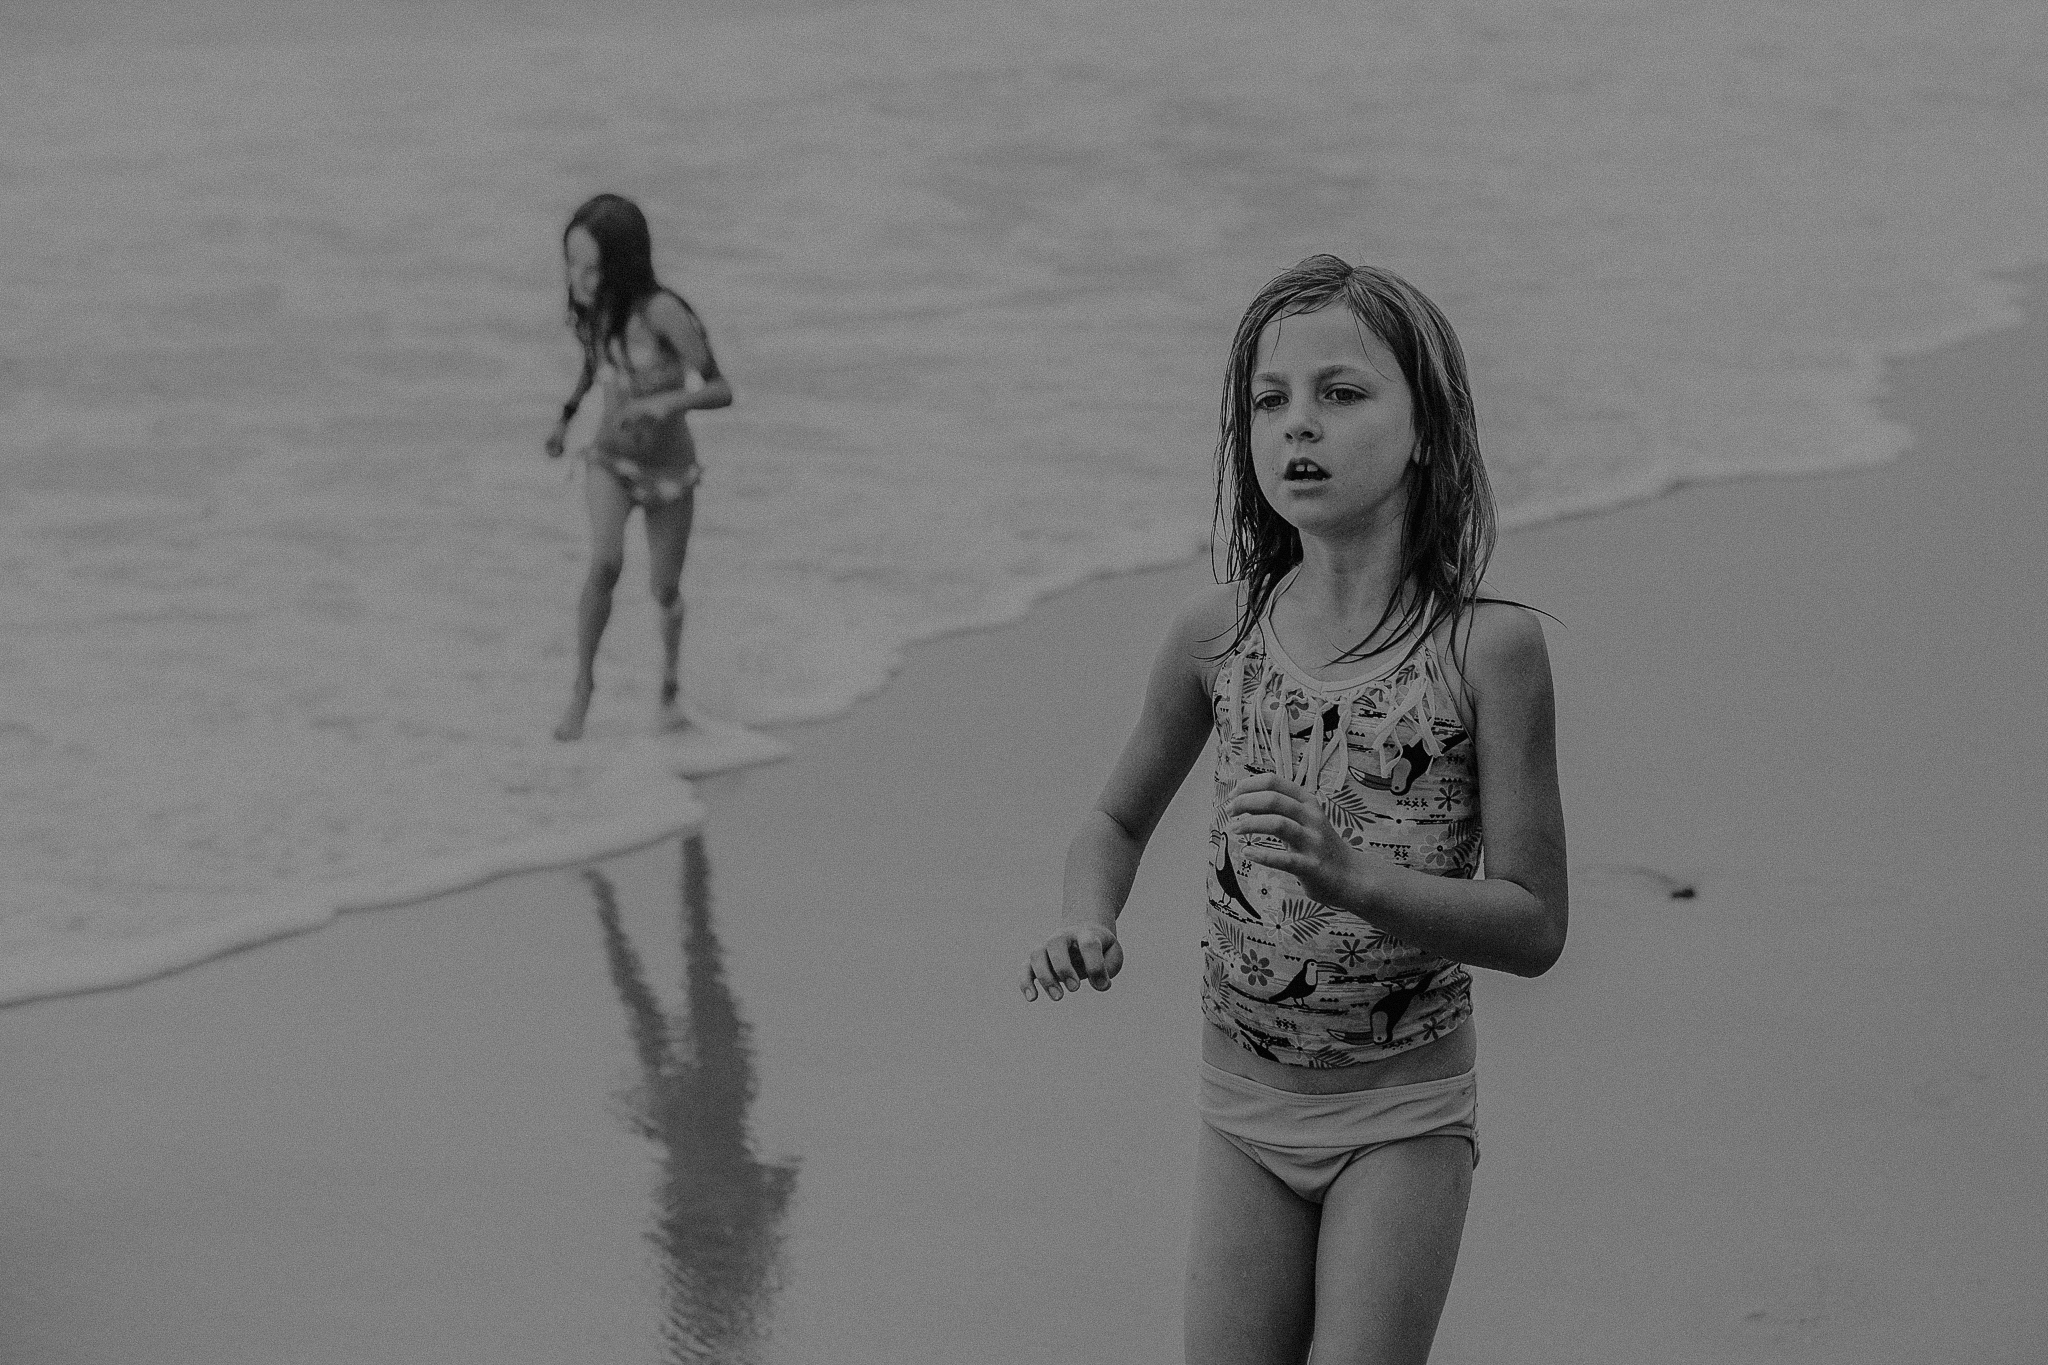 Young girls playing along the beach together